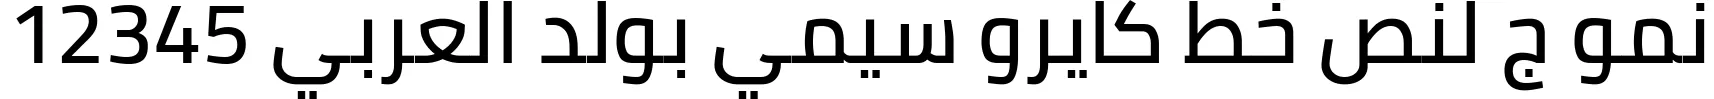 Dynamic Cairo SemiBold Font Preview https://safirsoft.com